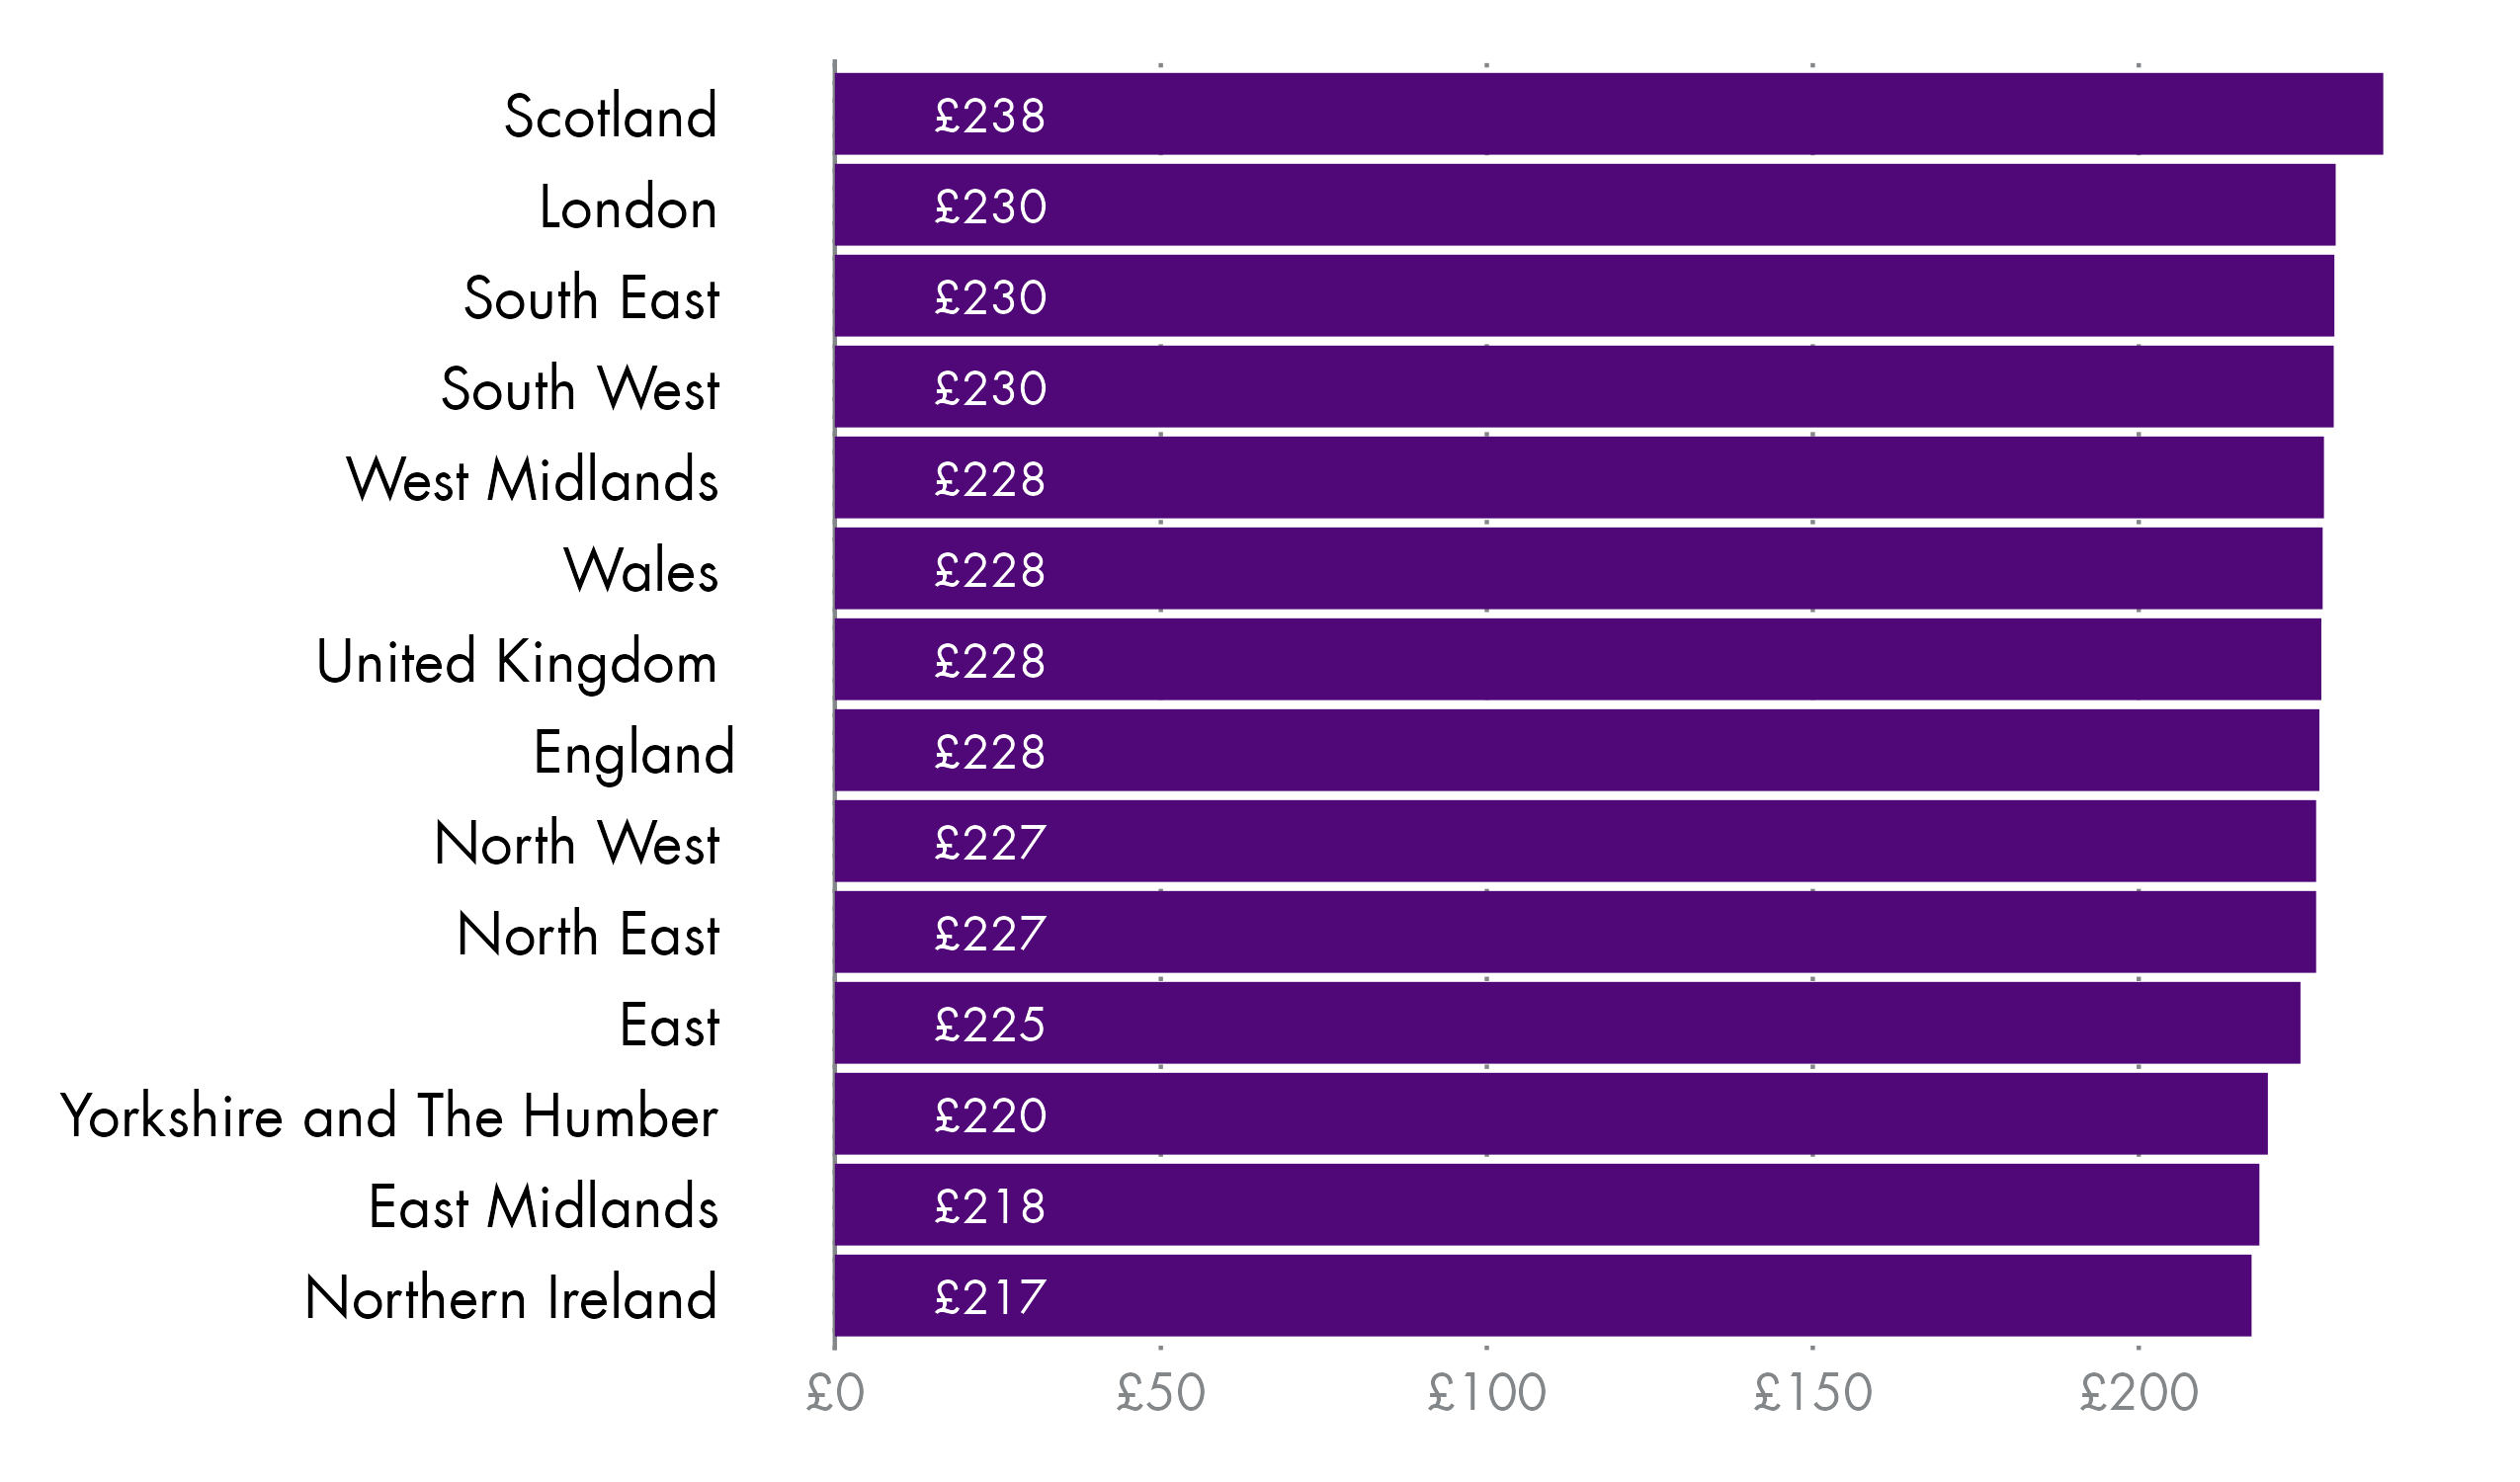 A horizontal bar chart showing the median gross weekly pay for part-time employees by nations and regions of the UK ranked from highest to lowest.